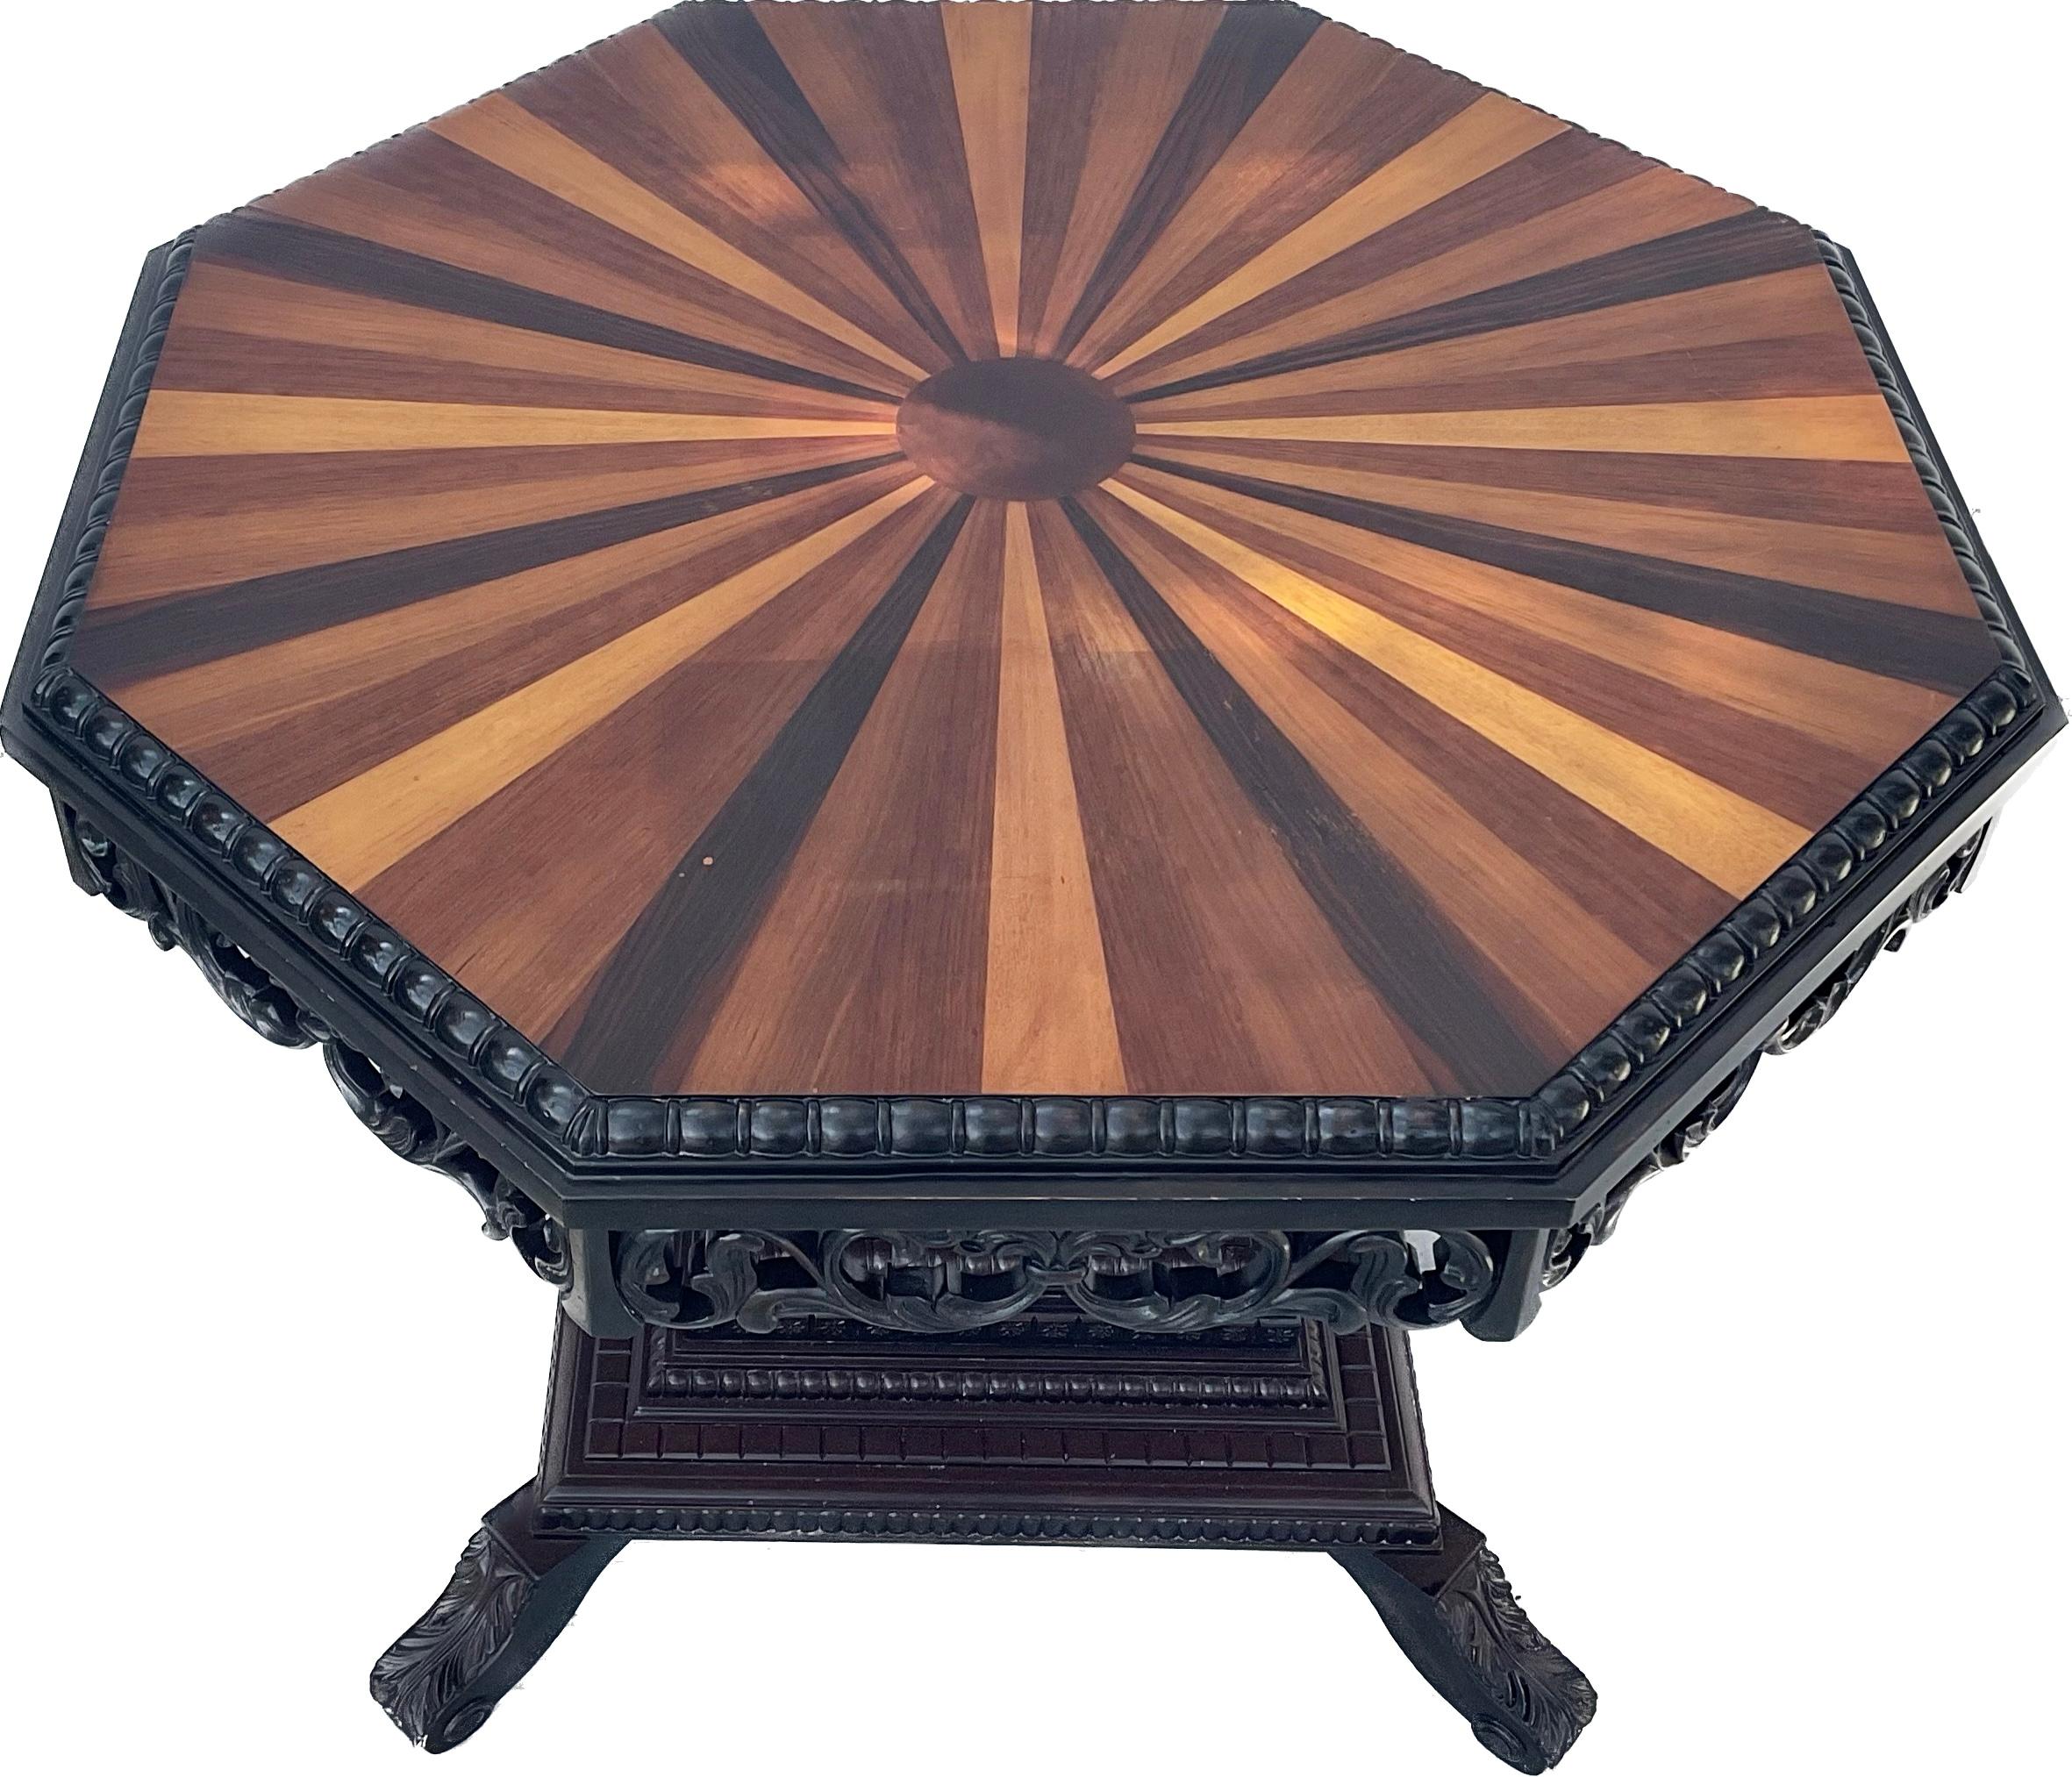 Very unique late 20th century Anglo-Indian octagonal center table in ebony wood. Table has segmented wood top, inlaid with rays of exotic woods.  Carved frieze is supported by wooden columns on a square with shaped bracket feet. This magnificent